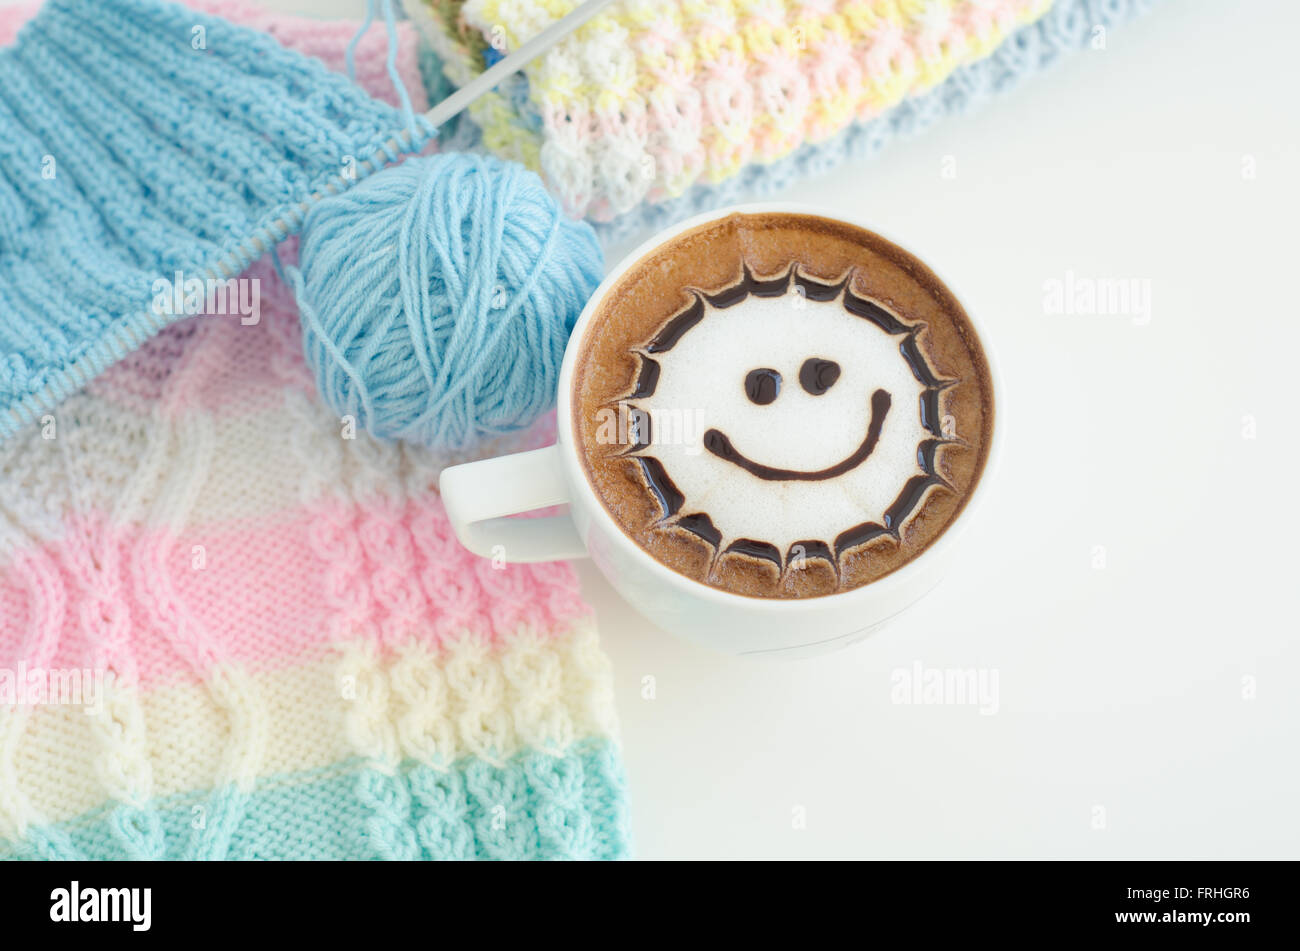 A cup of latte art and knitted vest Stock Photo